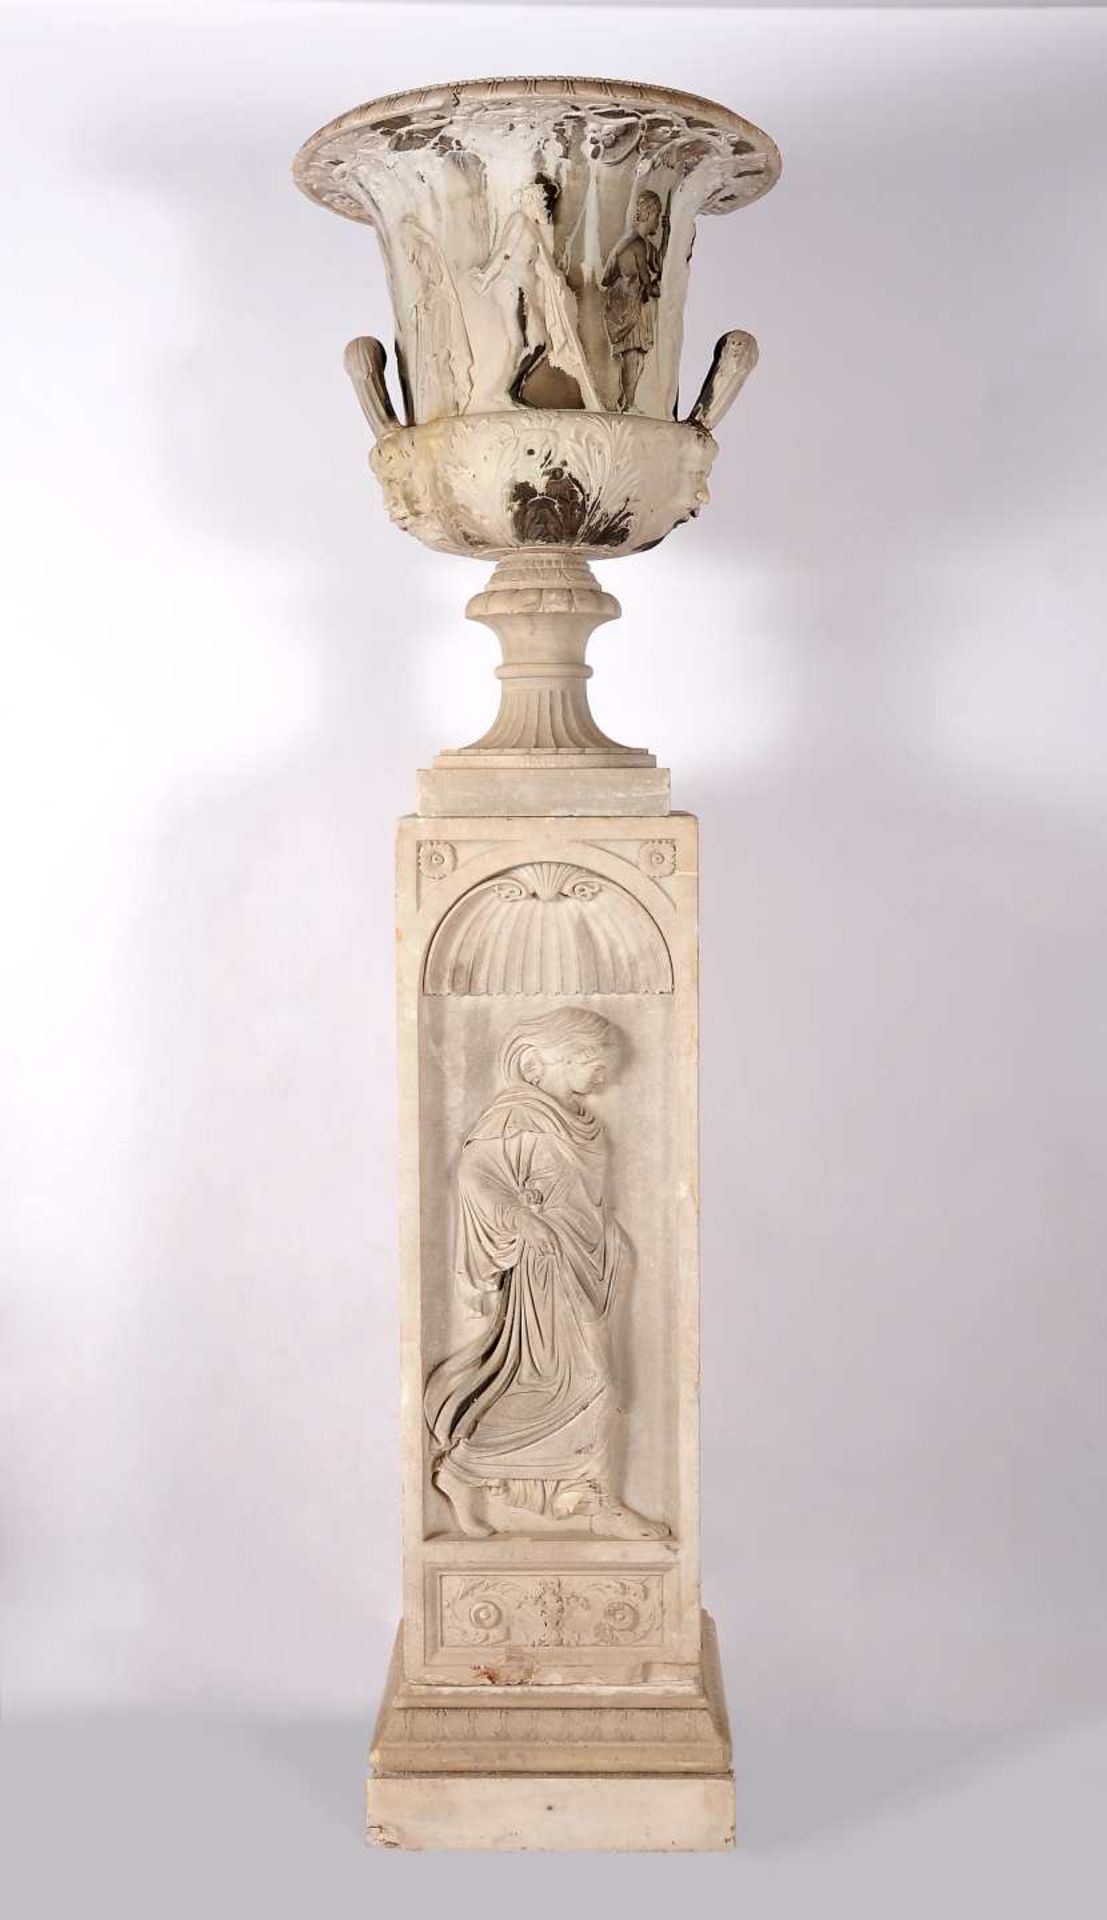 A pair of "Grand Tour" vases, Medici model, on columns